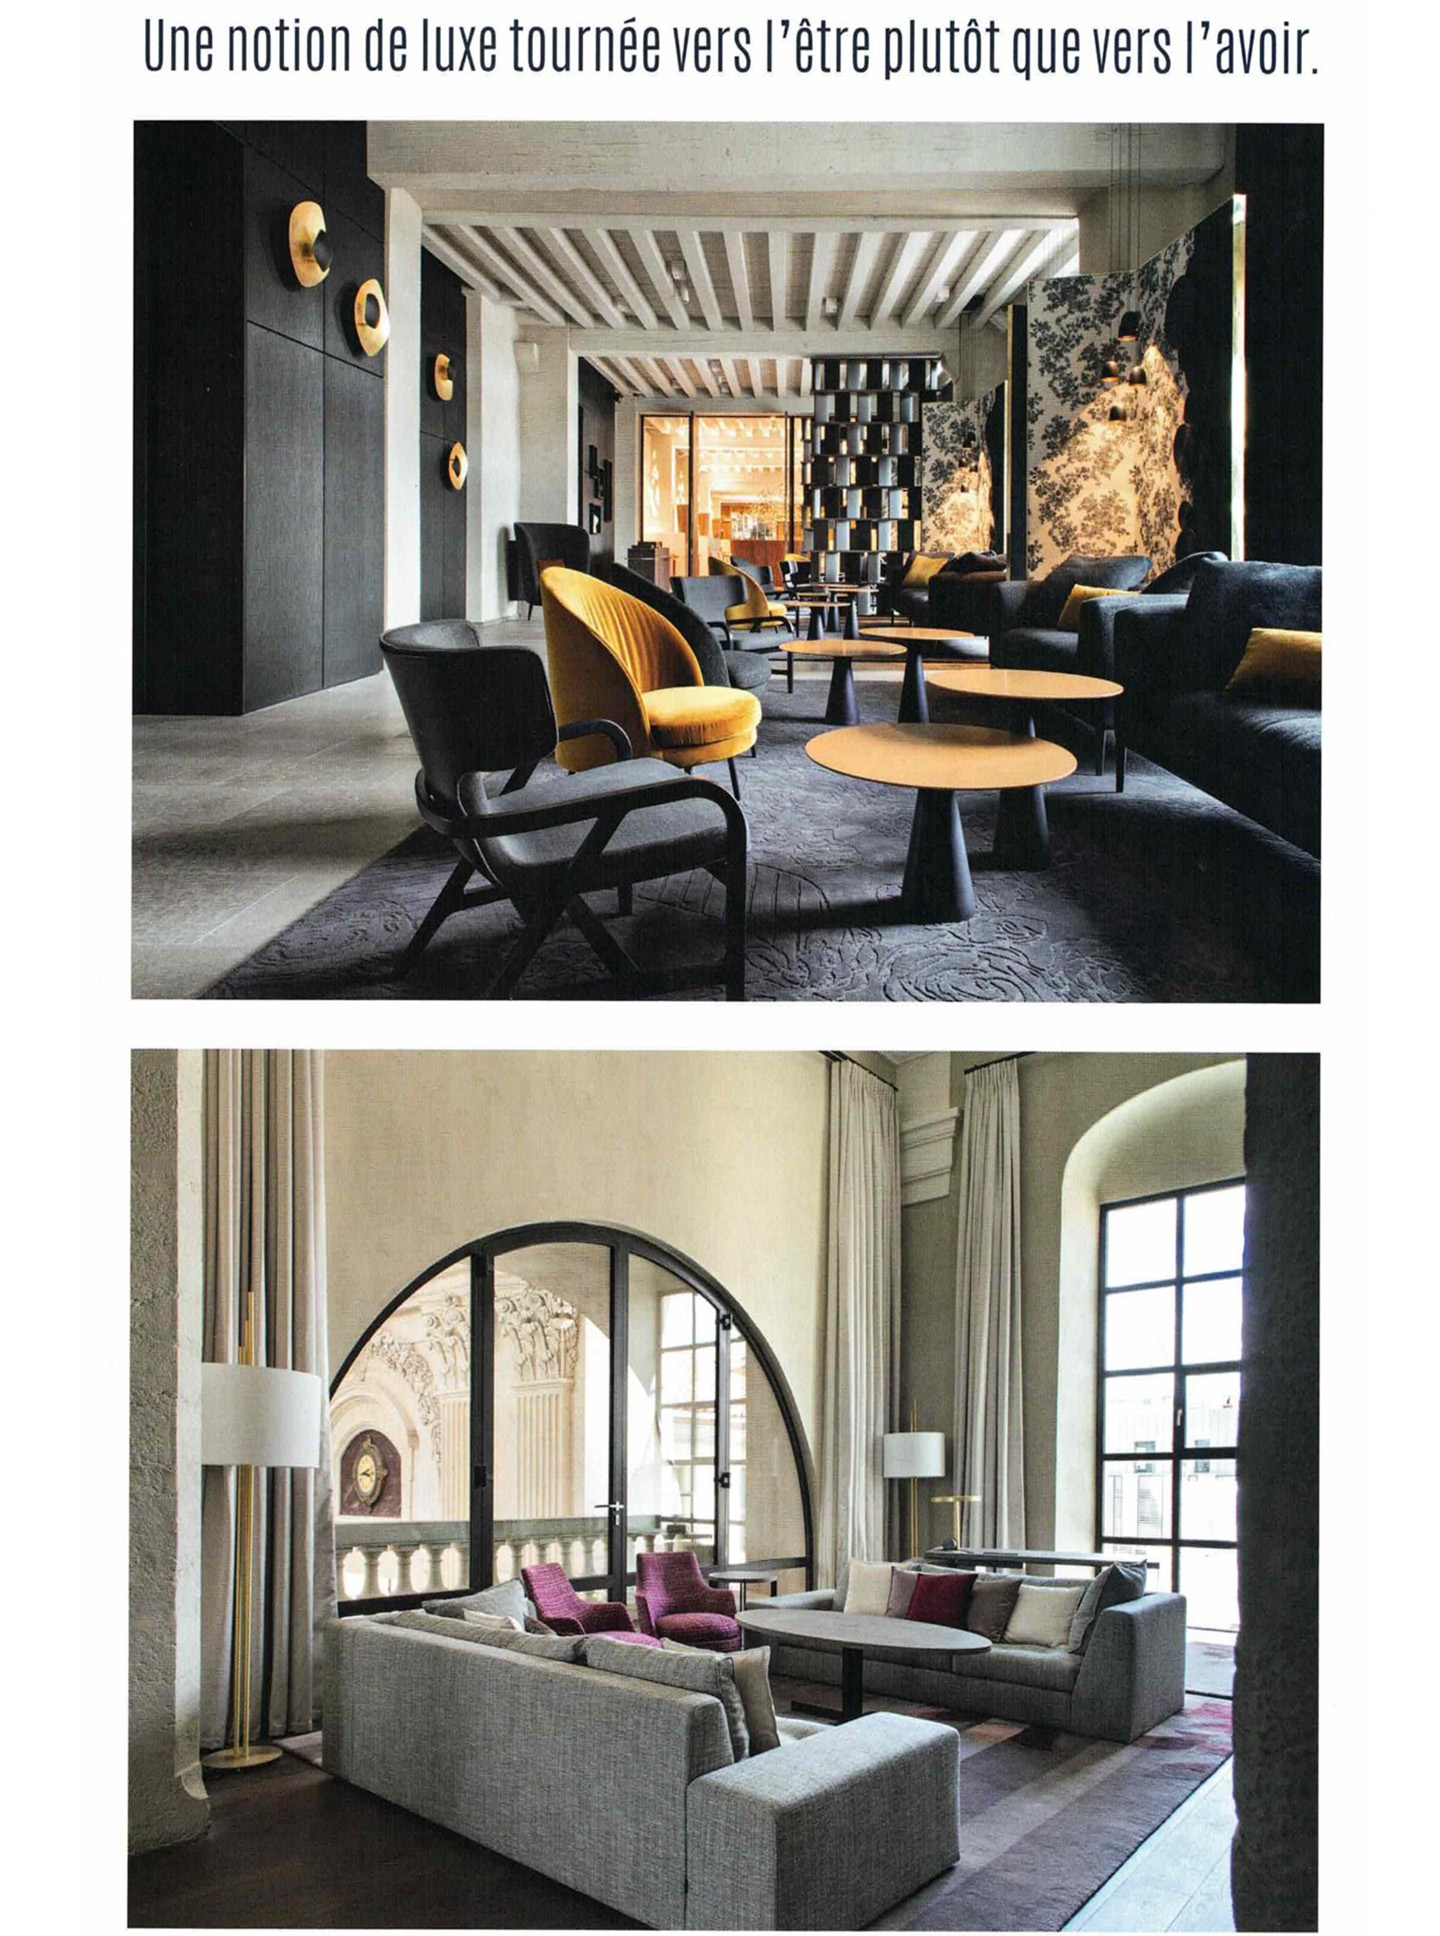 Article on the InterContinental Lyon Hotel Dieu realized by the studio jean-Philippe Nuel in the magazine domodéco, new luxury hotel, luxury interior design, historical heritage